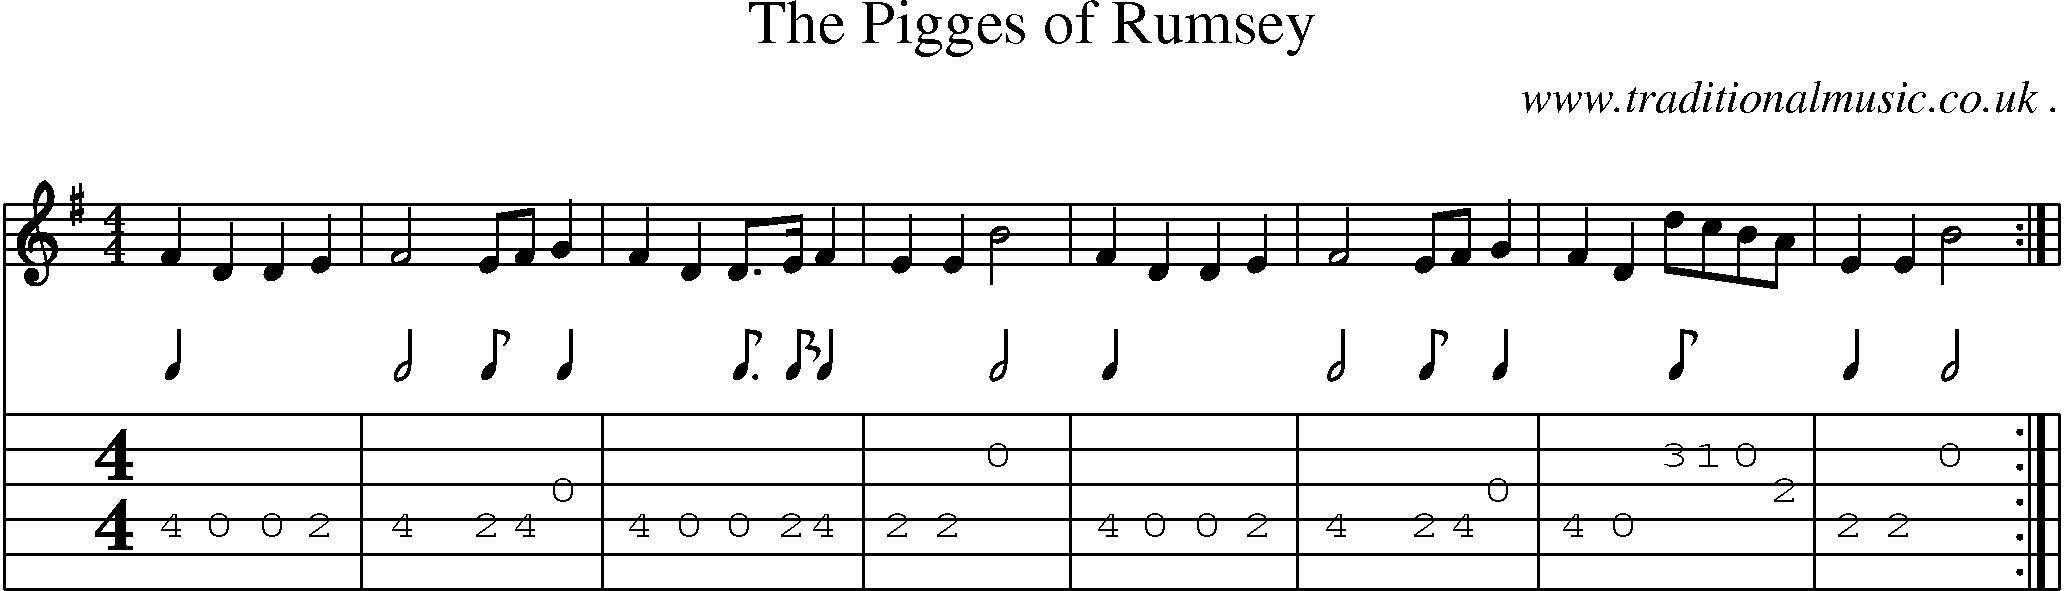 Sheet-music  score, Chords and Guitar Tabs for The Pigges Of Rumsey